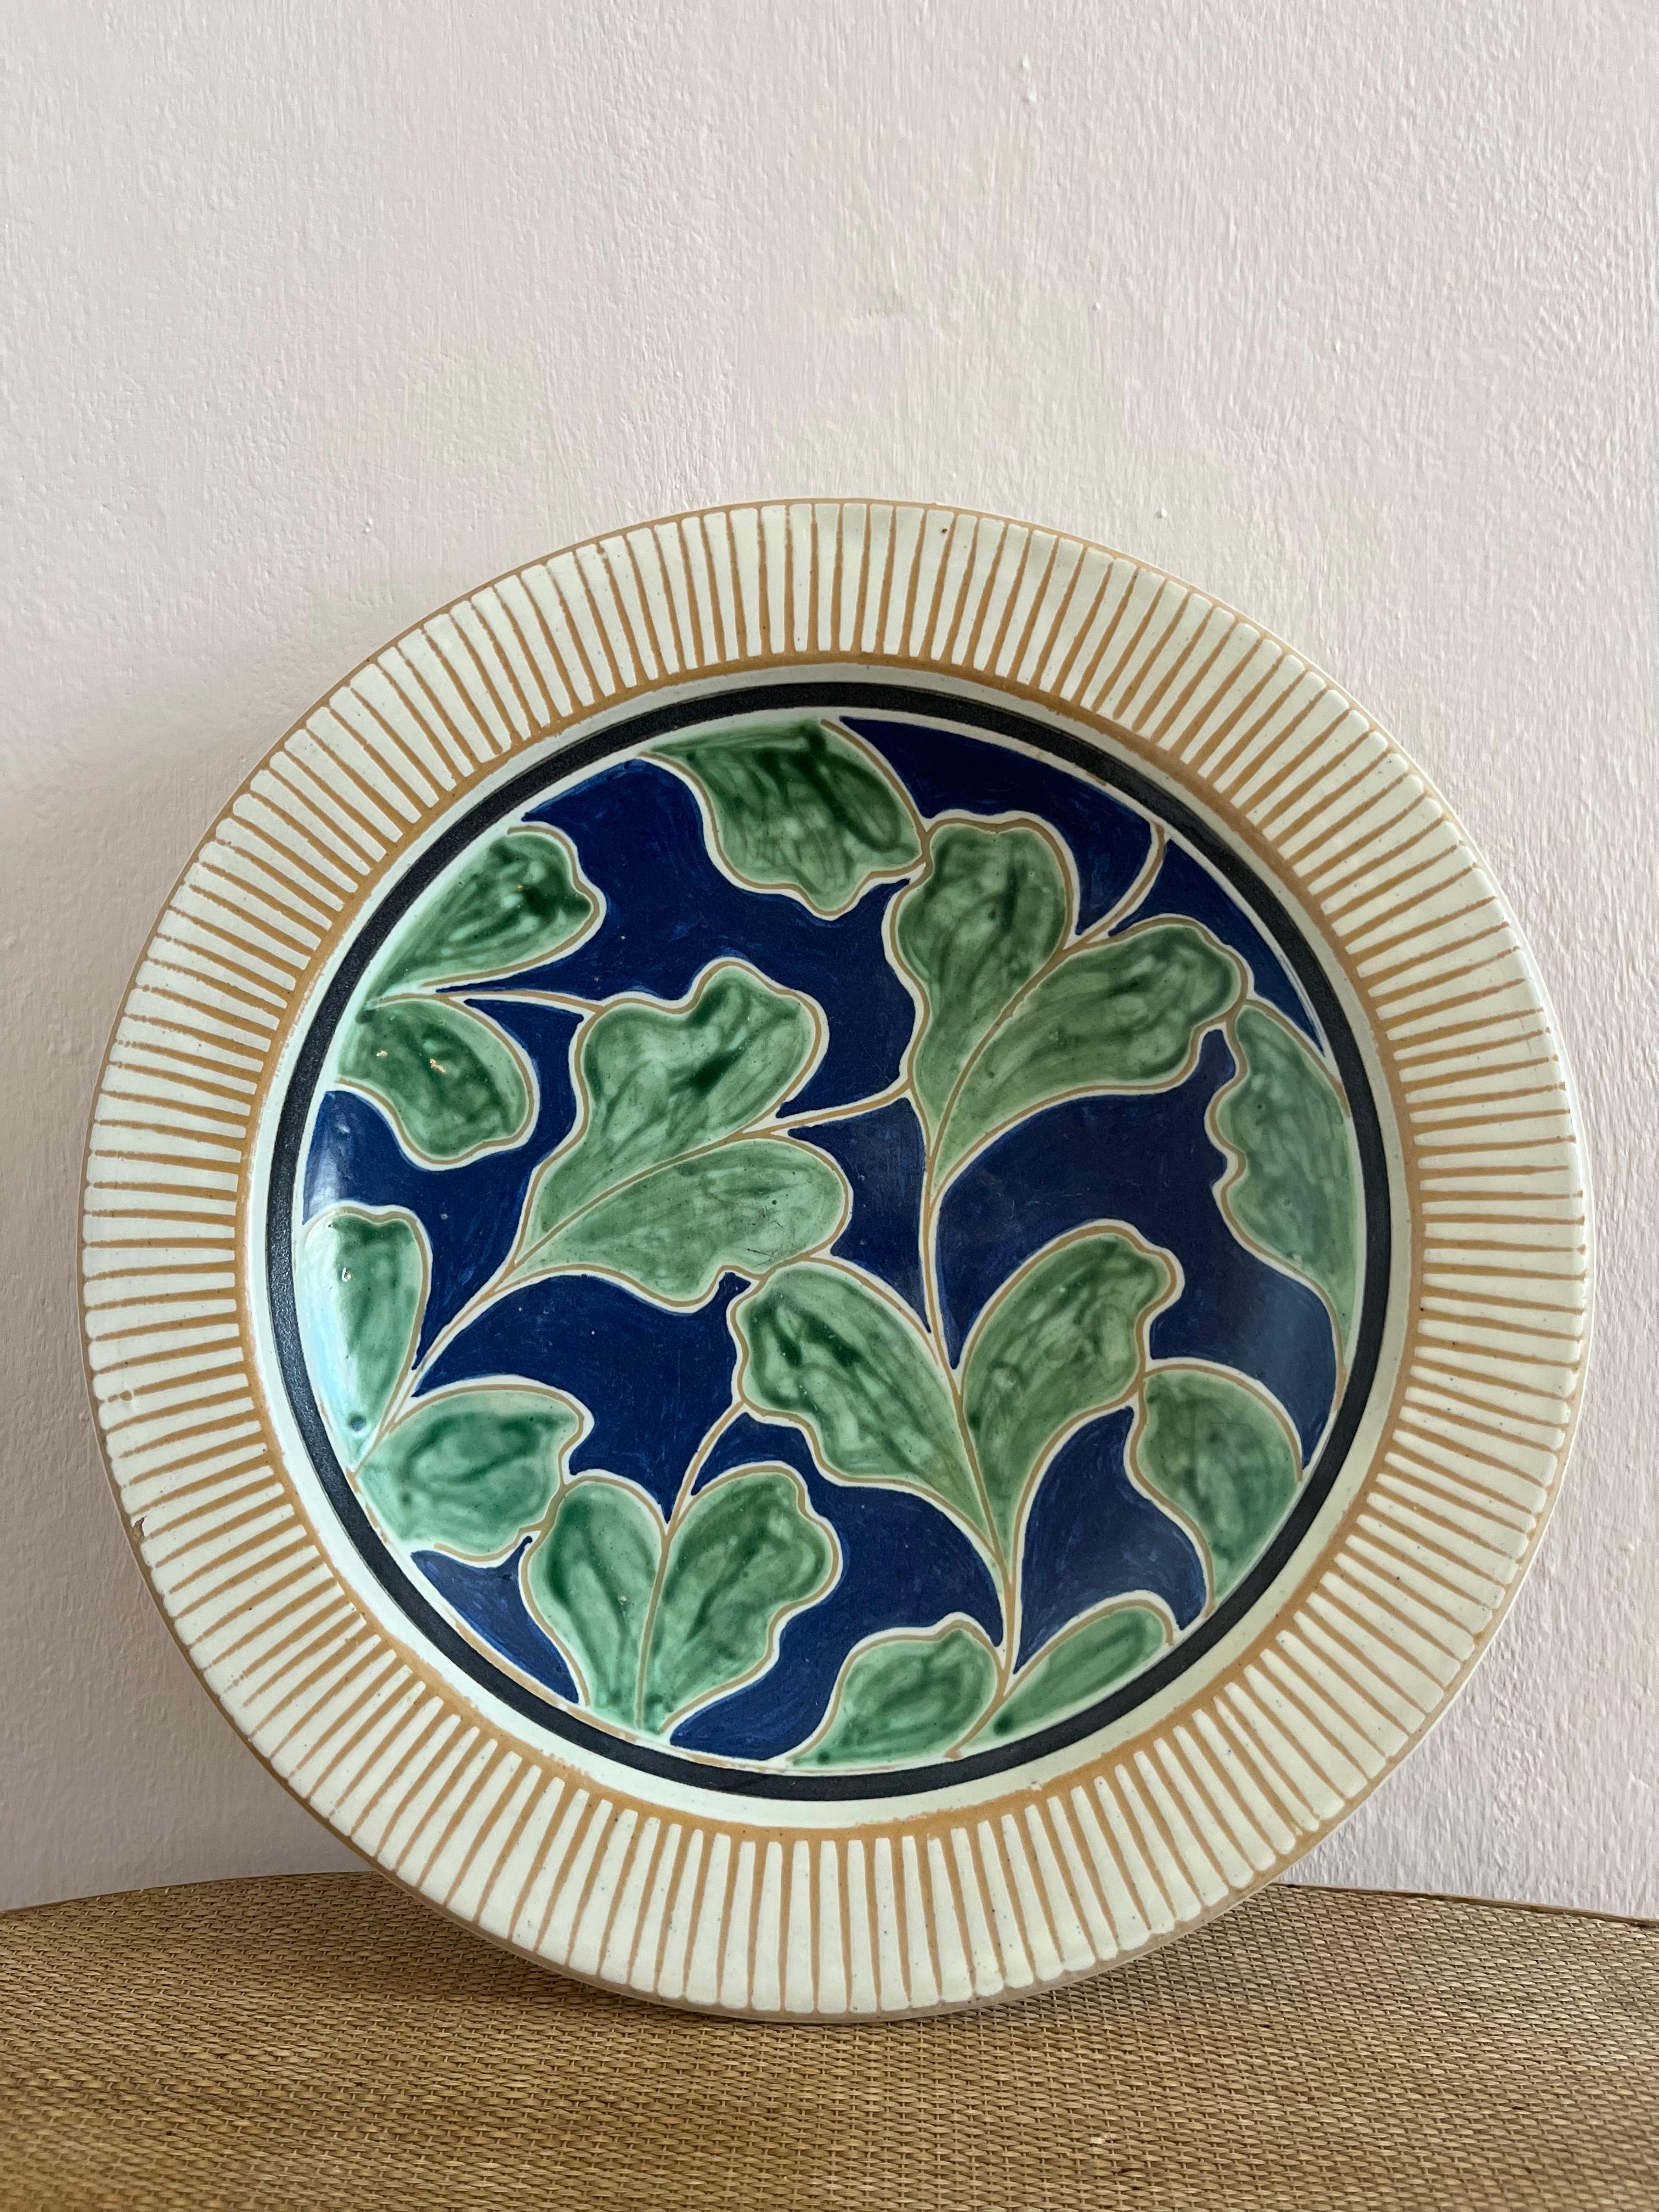 Very decorative Danish midcentury ceramic dish with incised lines and glazed in cream, green and blue nuances with leaf decorations. Indistinct signature, very much in the style of Danish pottery Haunsø Ceramics. 
The piece is in overall good